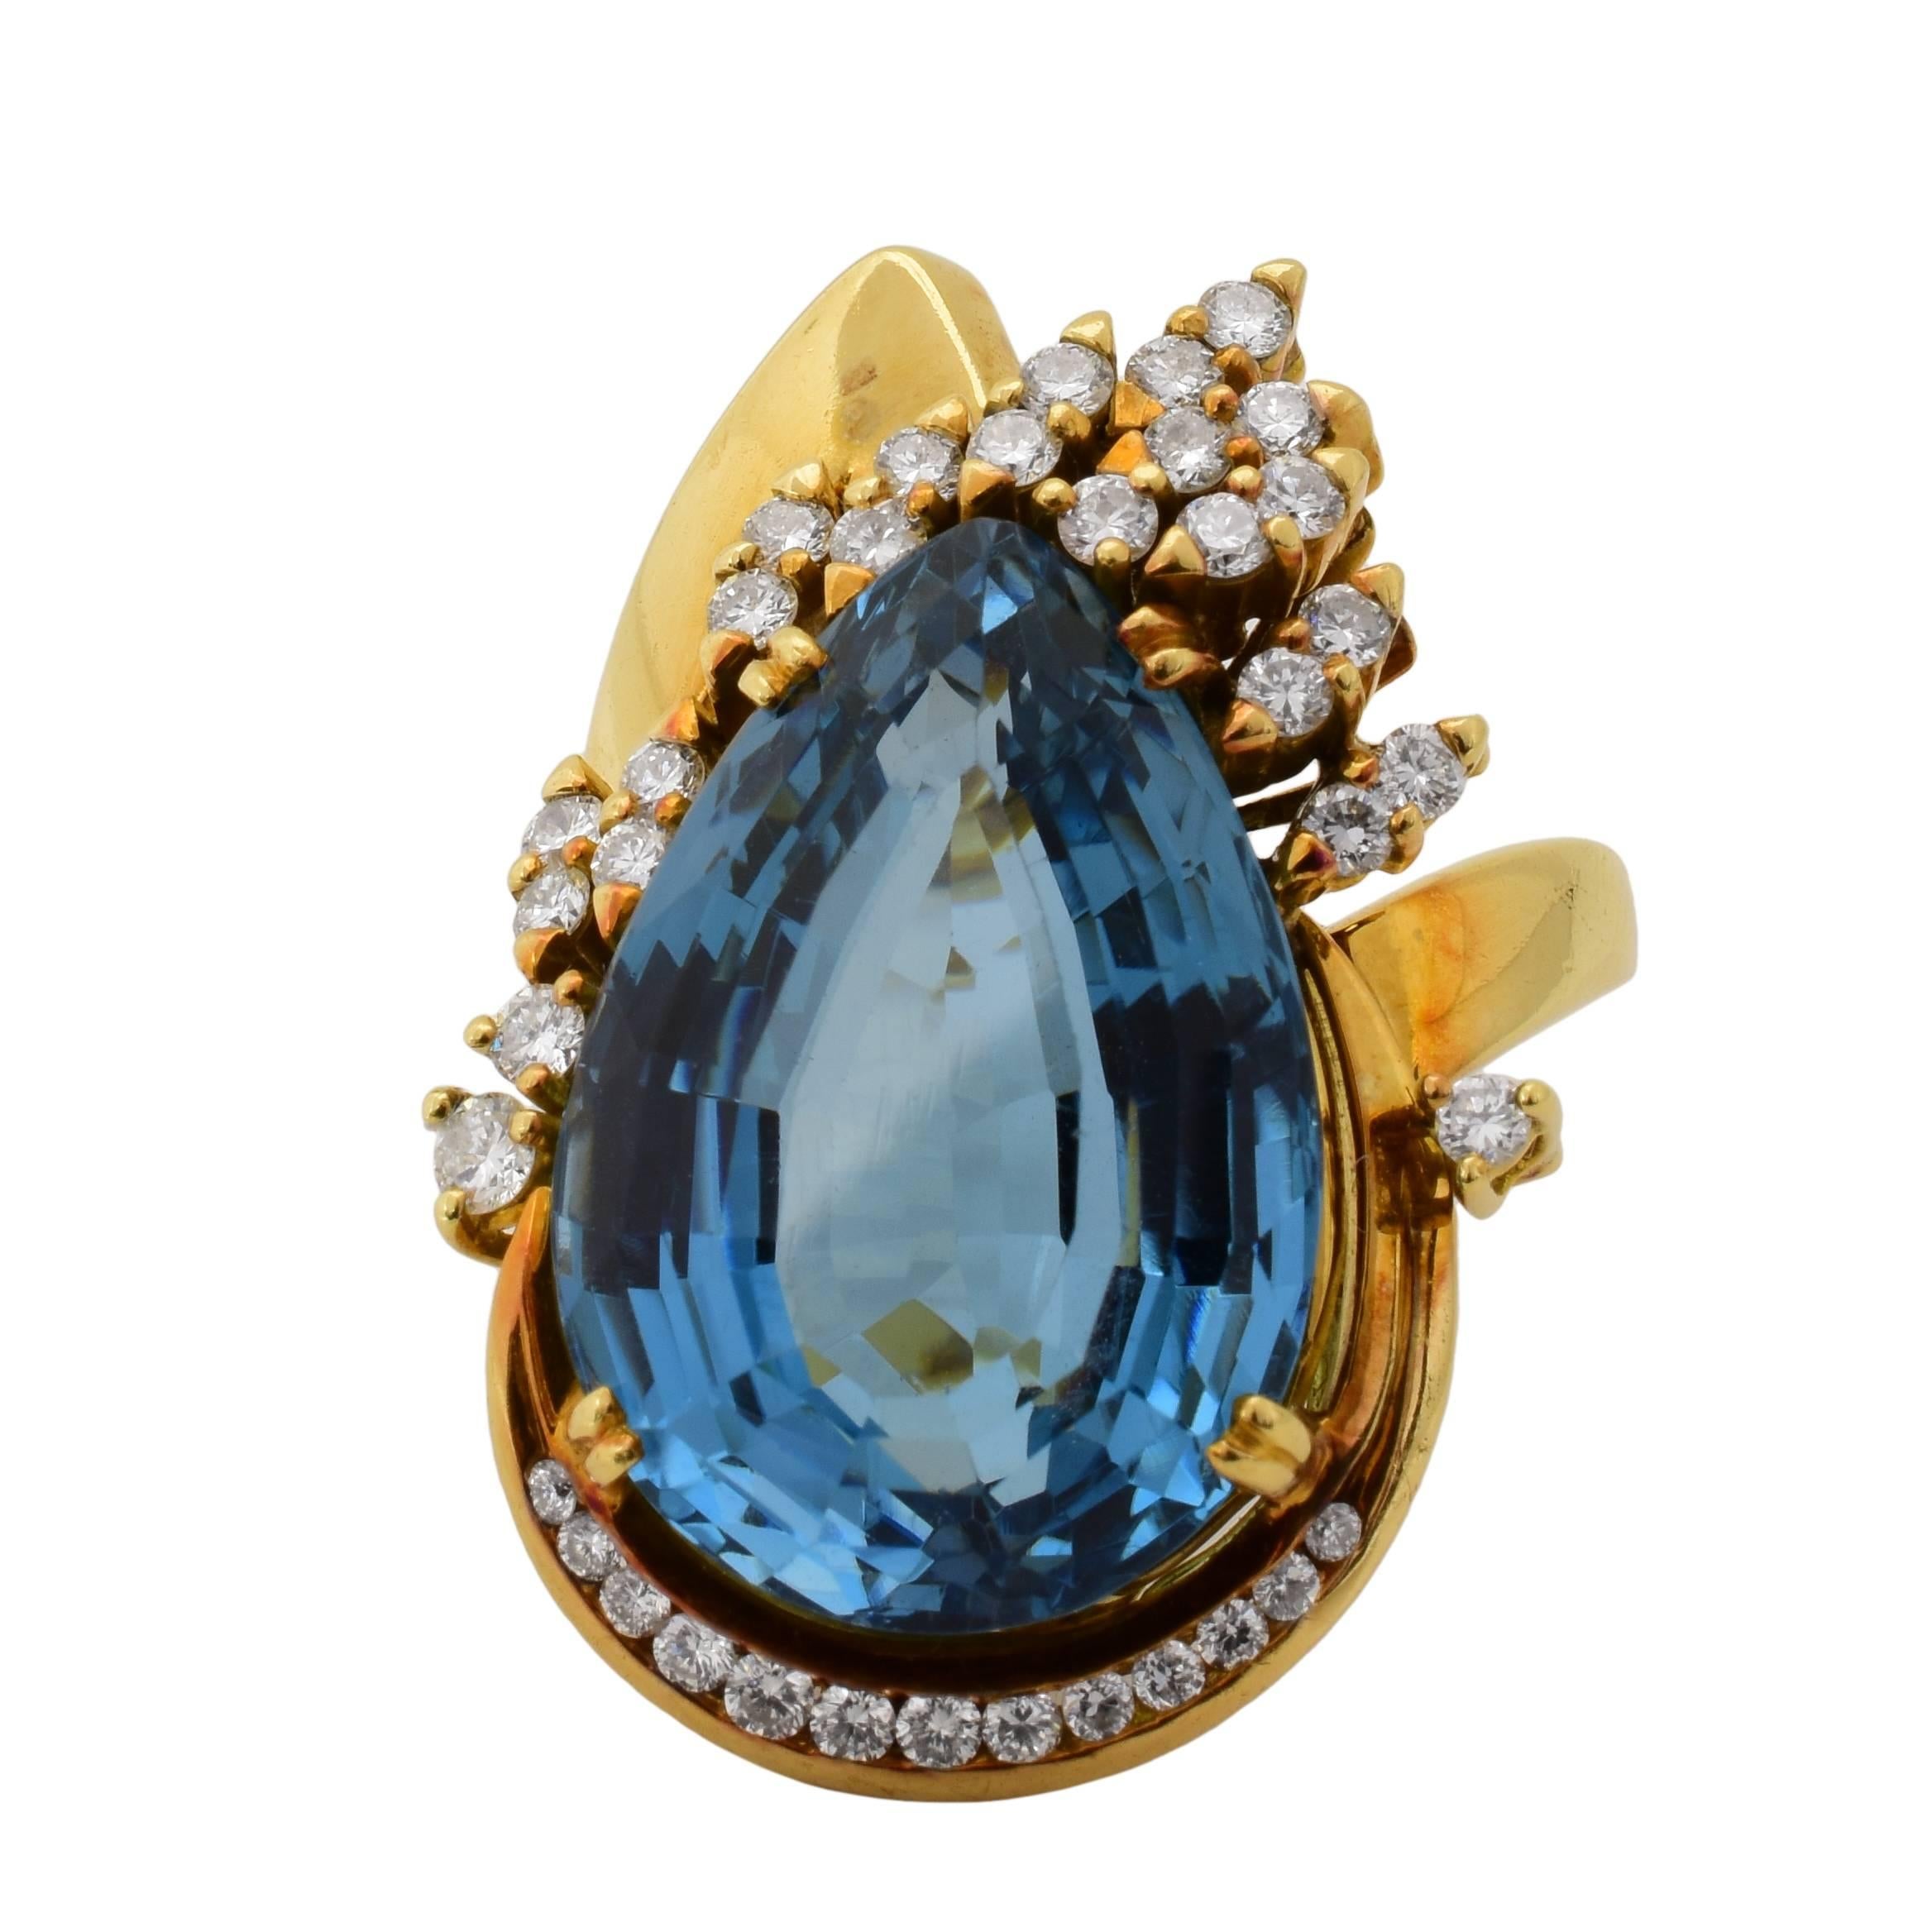 This 1940's cocktail ring features an approximately 20 carat pear shape blue topaz center stone, accented by a cluster of diamonds, in an 18k yellow gold Retro mounting. 